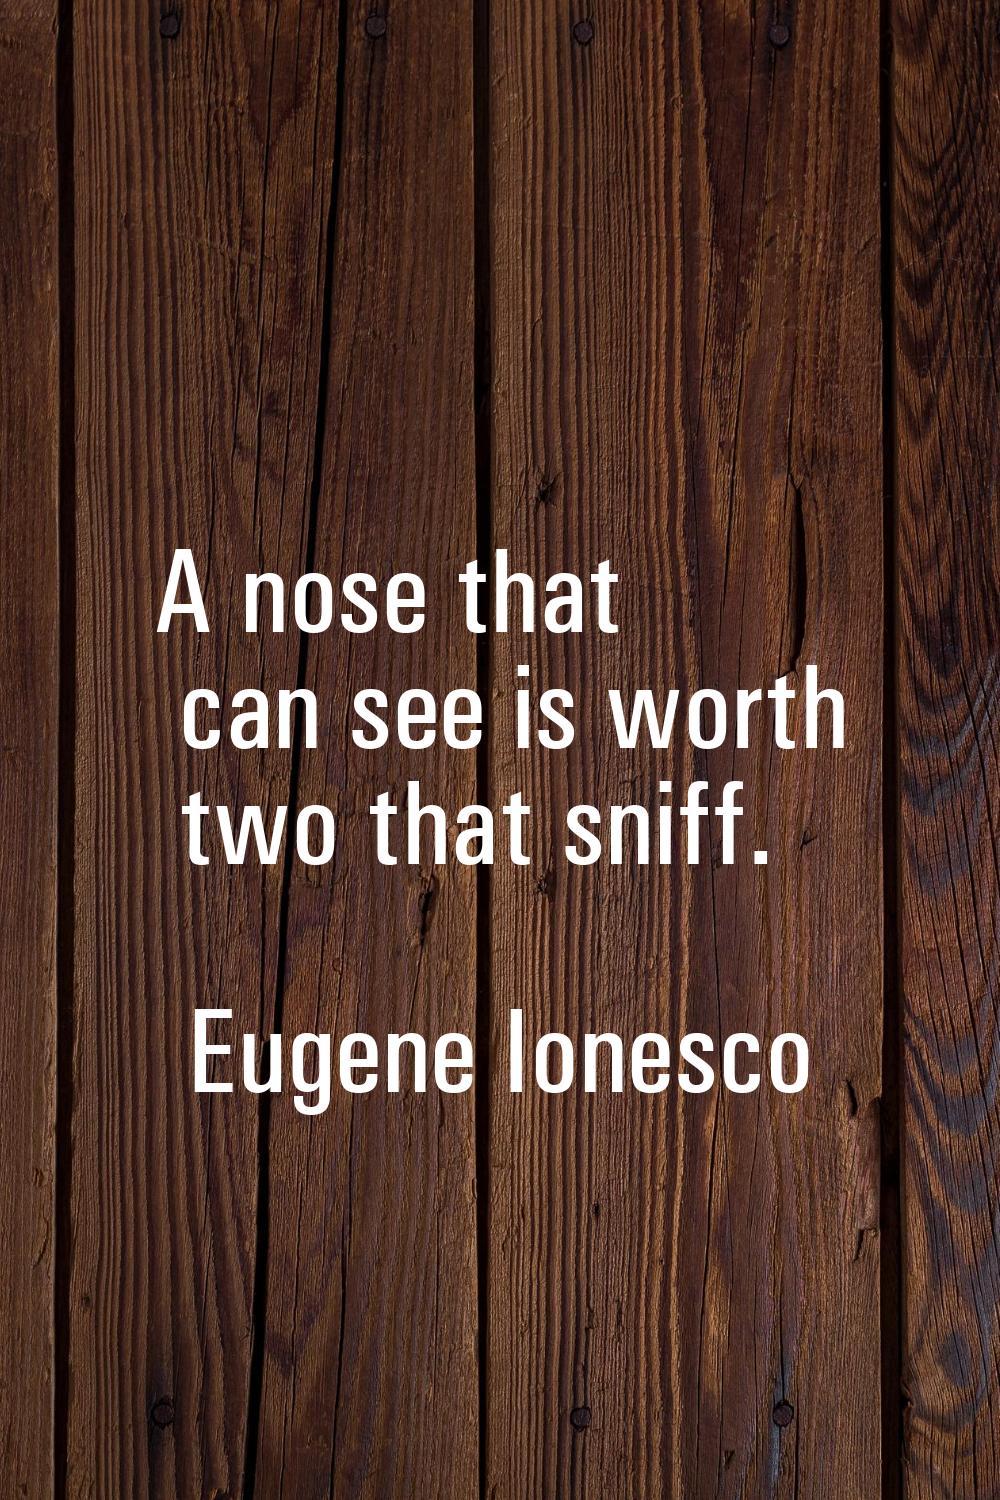 A nose that can see is worth two that sniff.